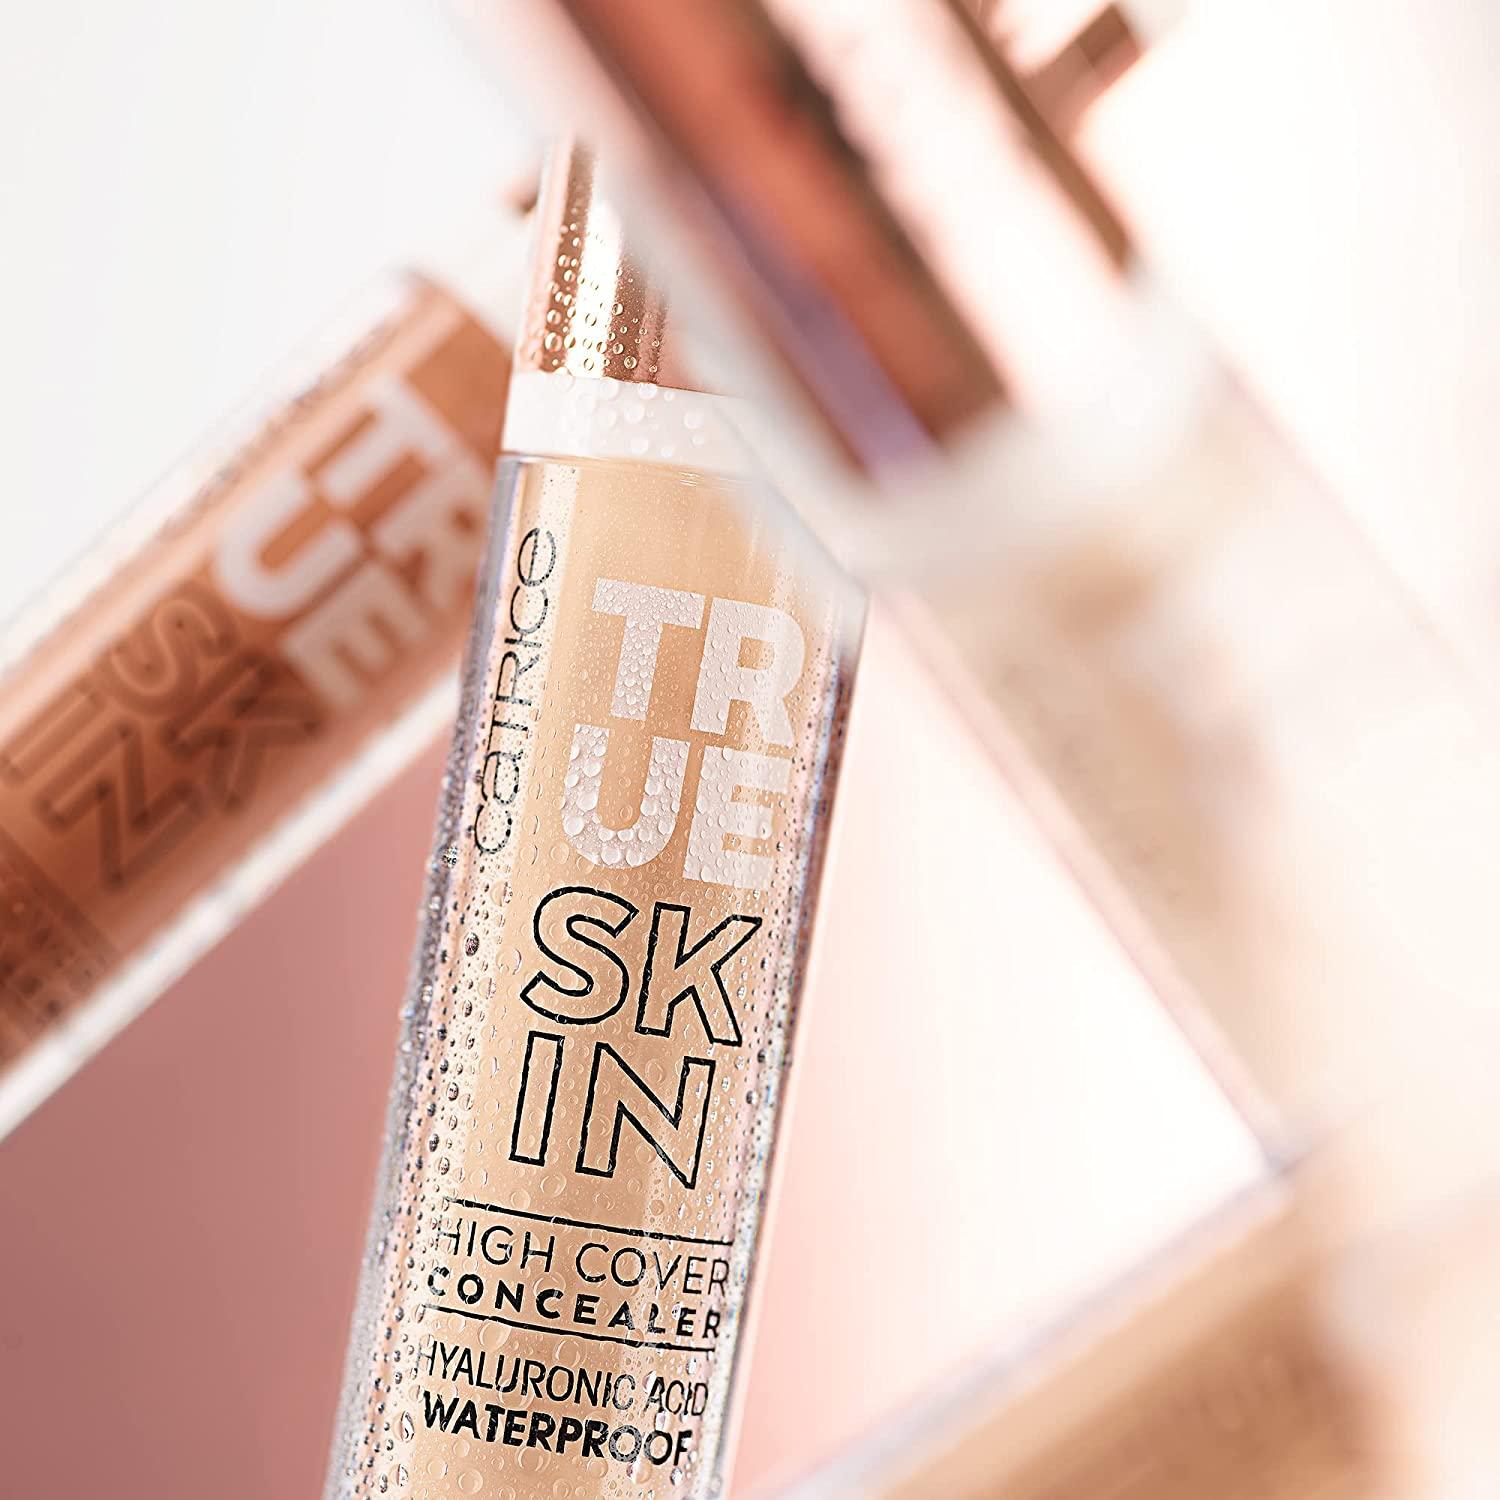 Catrice | True Skin High Cover Concealer | Waterproof & Lightweight for  Soft Matte Look | Contains Hyaluronic Acid & Lasts Up to 18 Hours | Vegan,  Cruelty Free, Gluten Free (001 | Neutral Swan)